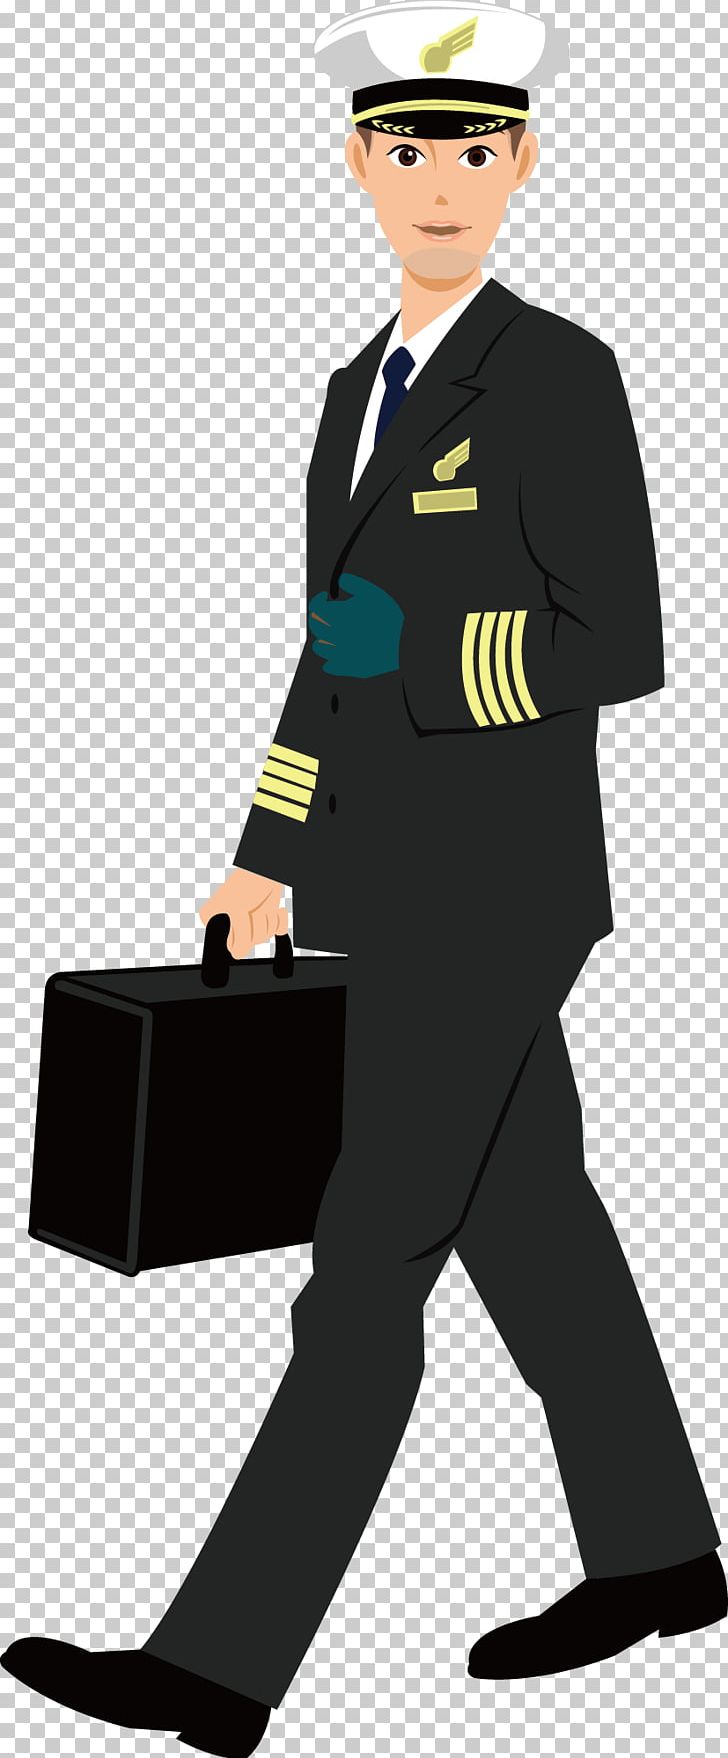 Flight Attendant Airplane Pilot In Command PNG, Clipart, Airplane, Animaatio, Businessperson, Cartoon, Drawing Free PNG Download